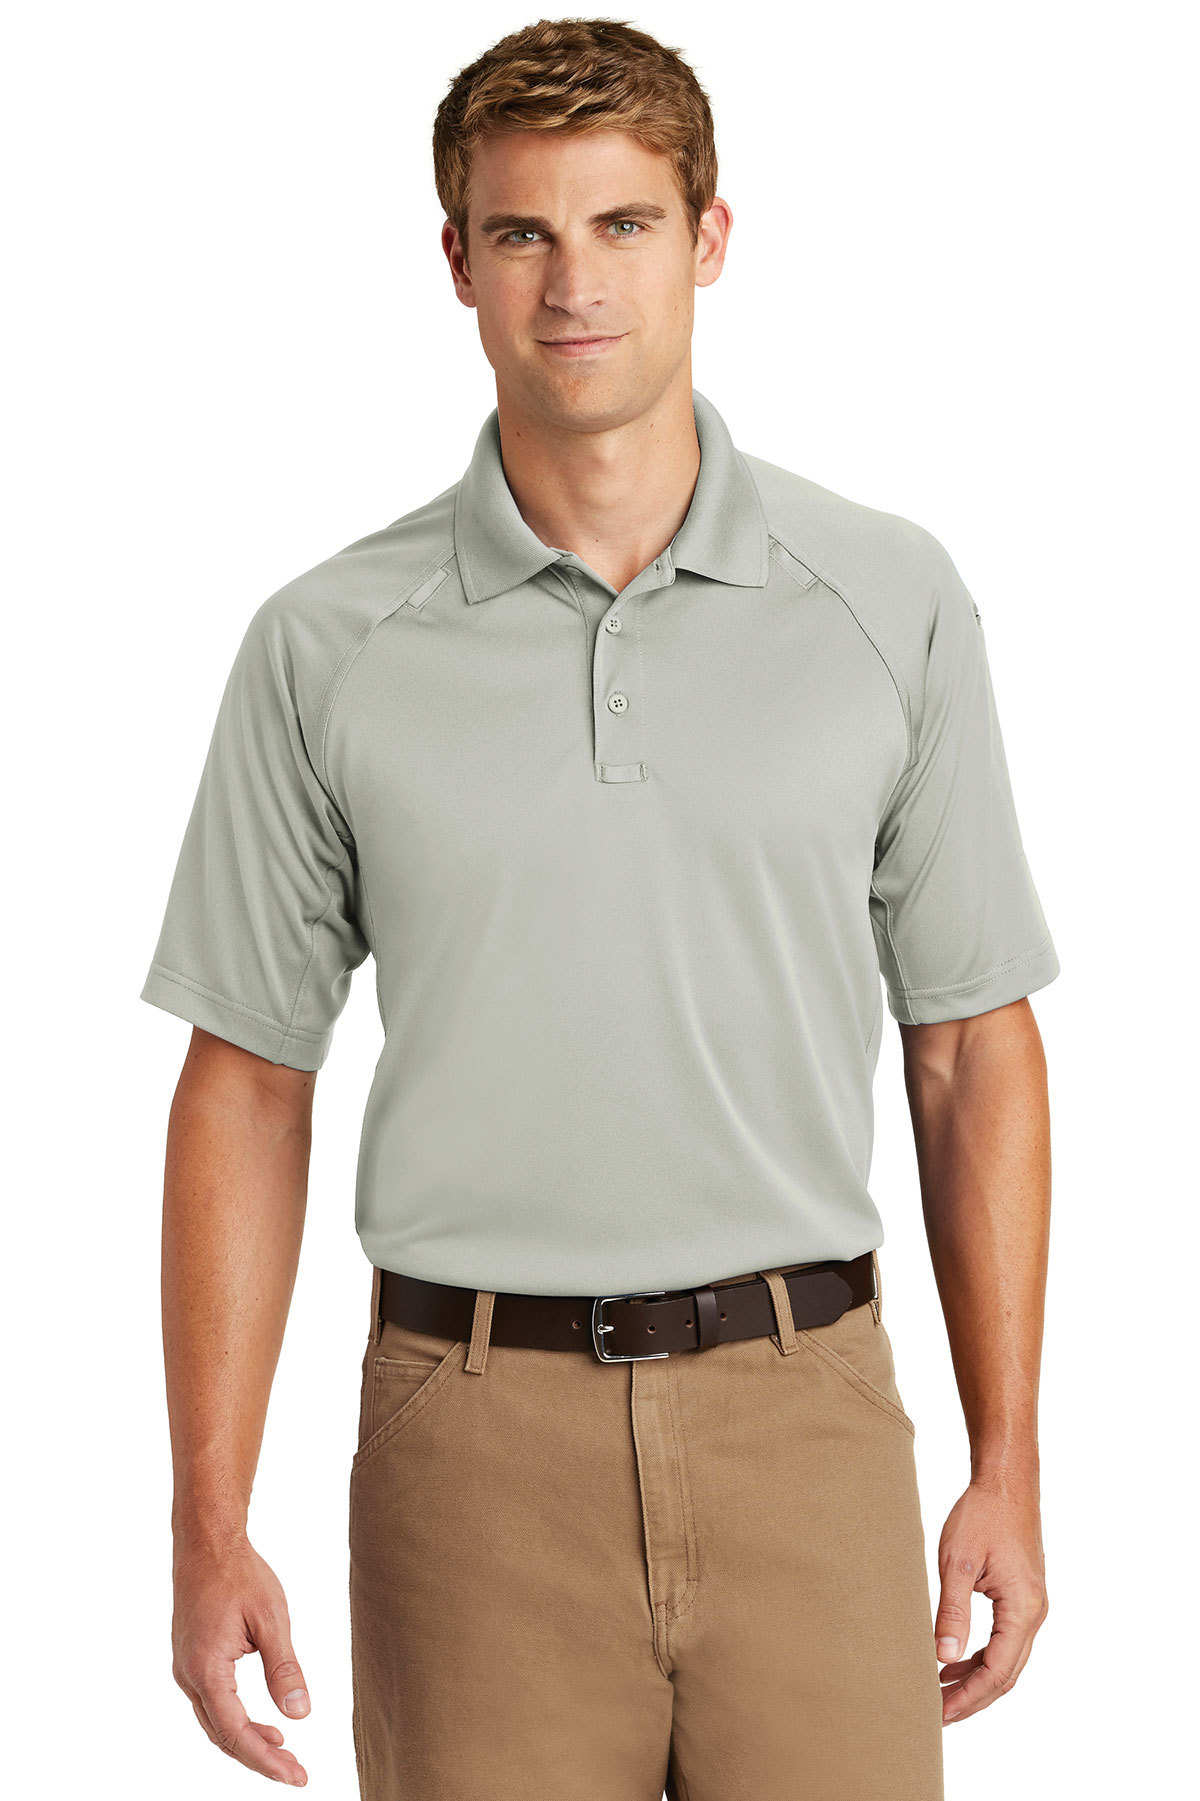 CornerStone  TLCS410 Tall Select Snag-Proof Tactical Polo Security Event Staff 